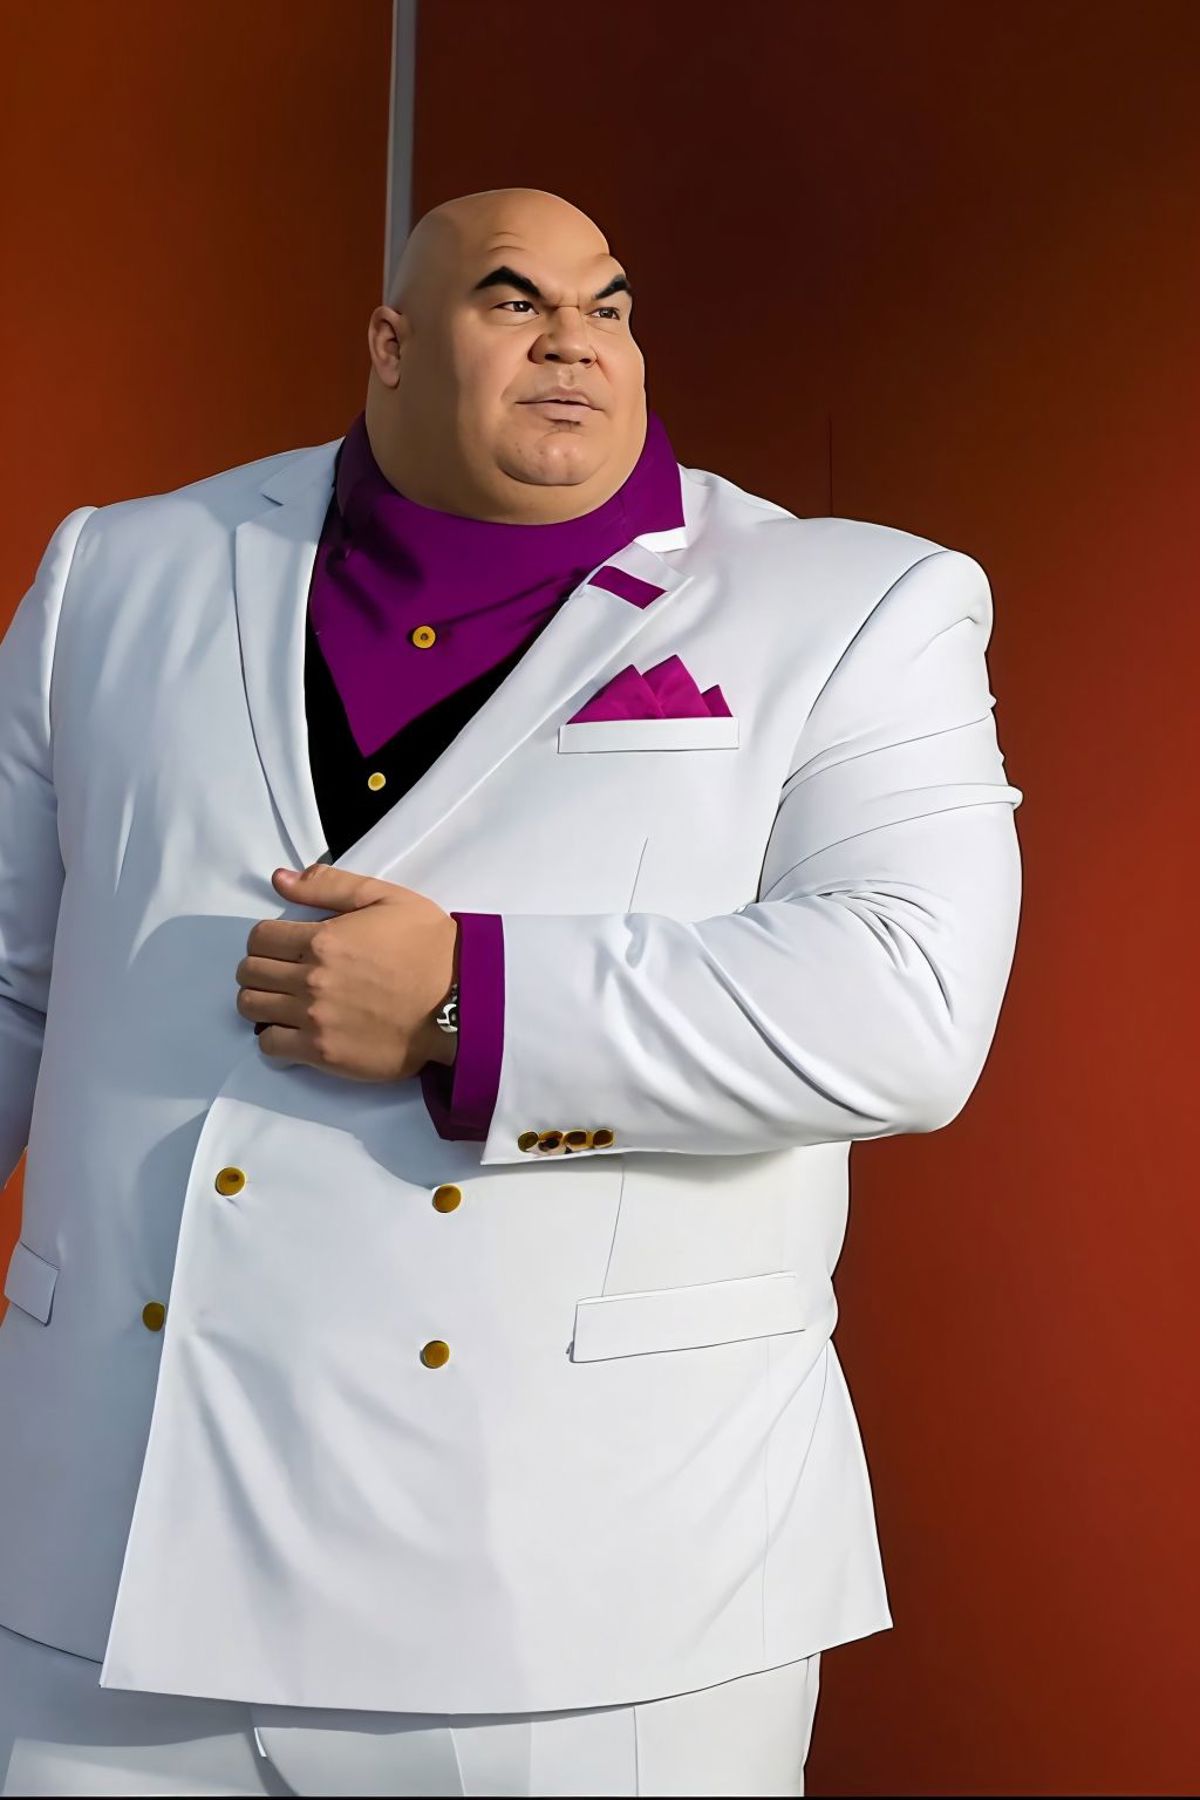 Kingpin (Spider-Man: The Animated Series) image by Montitto